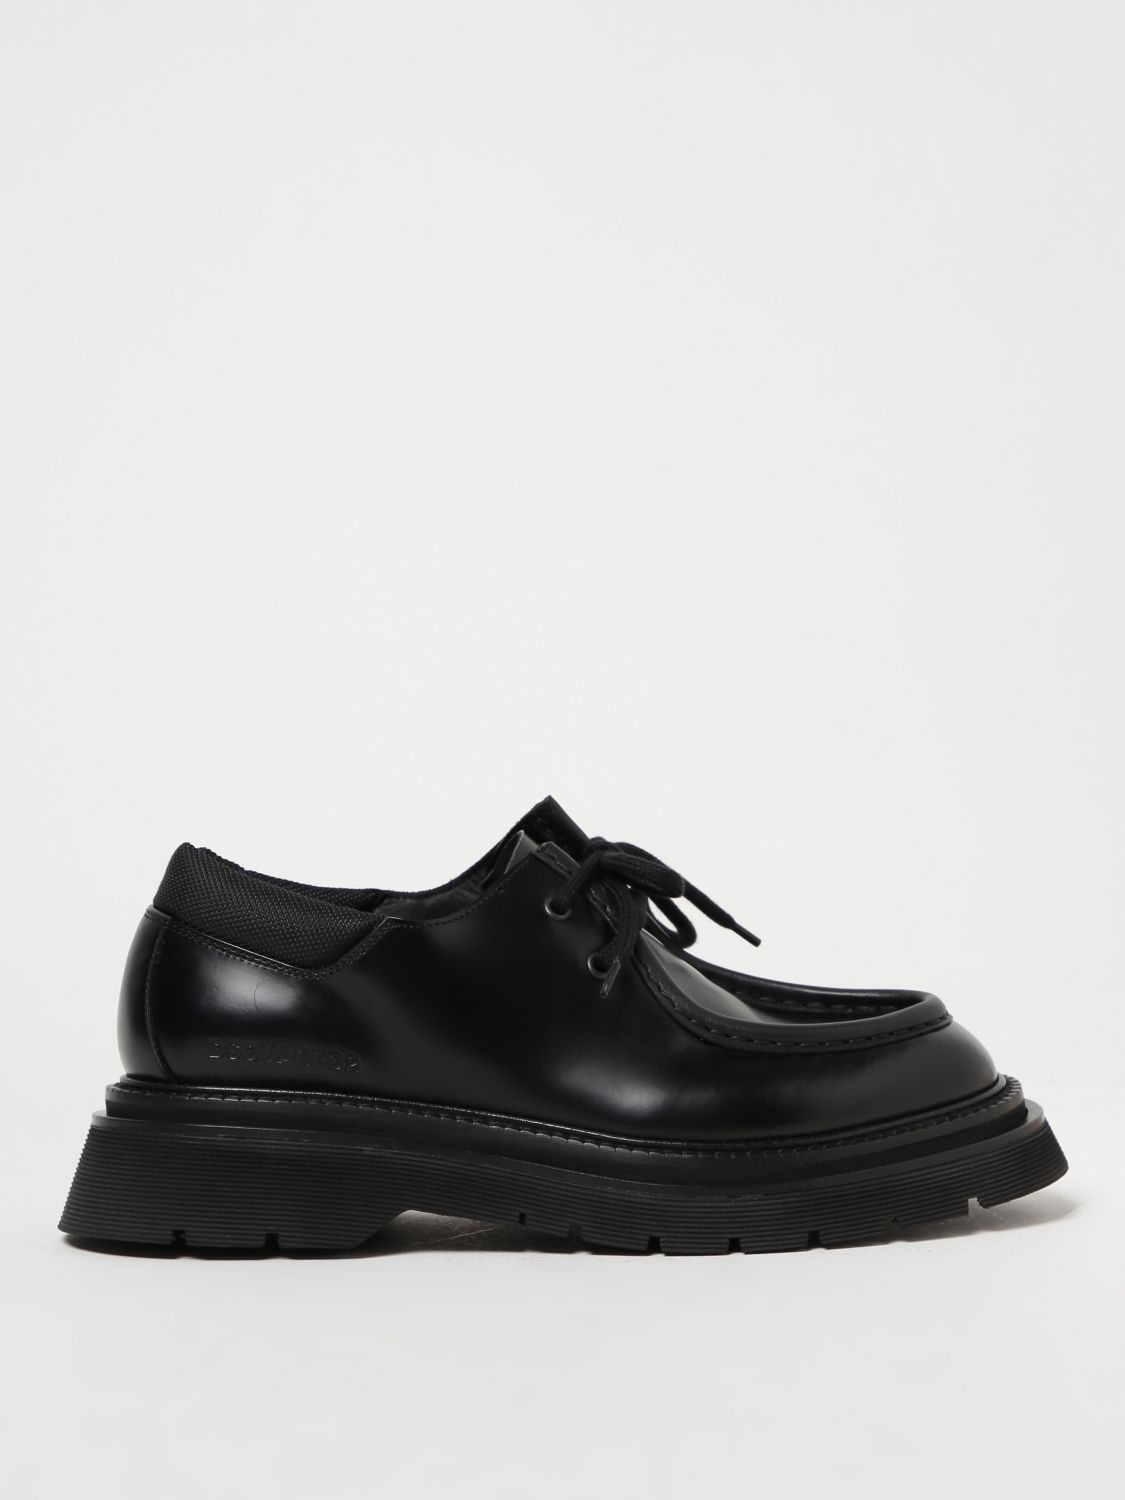 DSQUARED2 DERBY SHOES IN LEATHER,E79025002